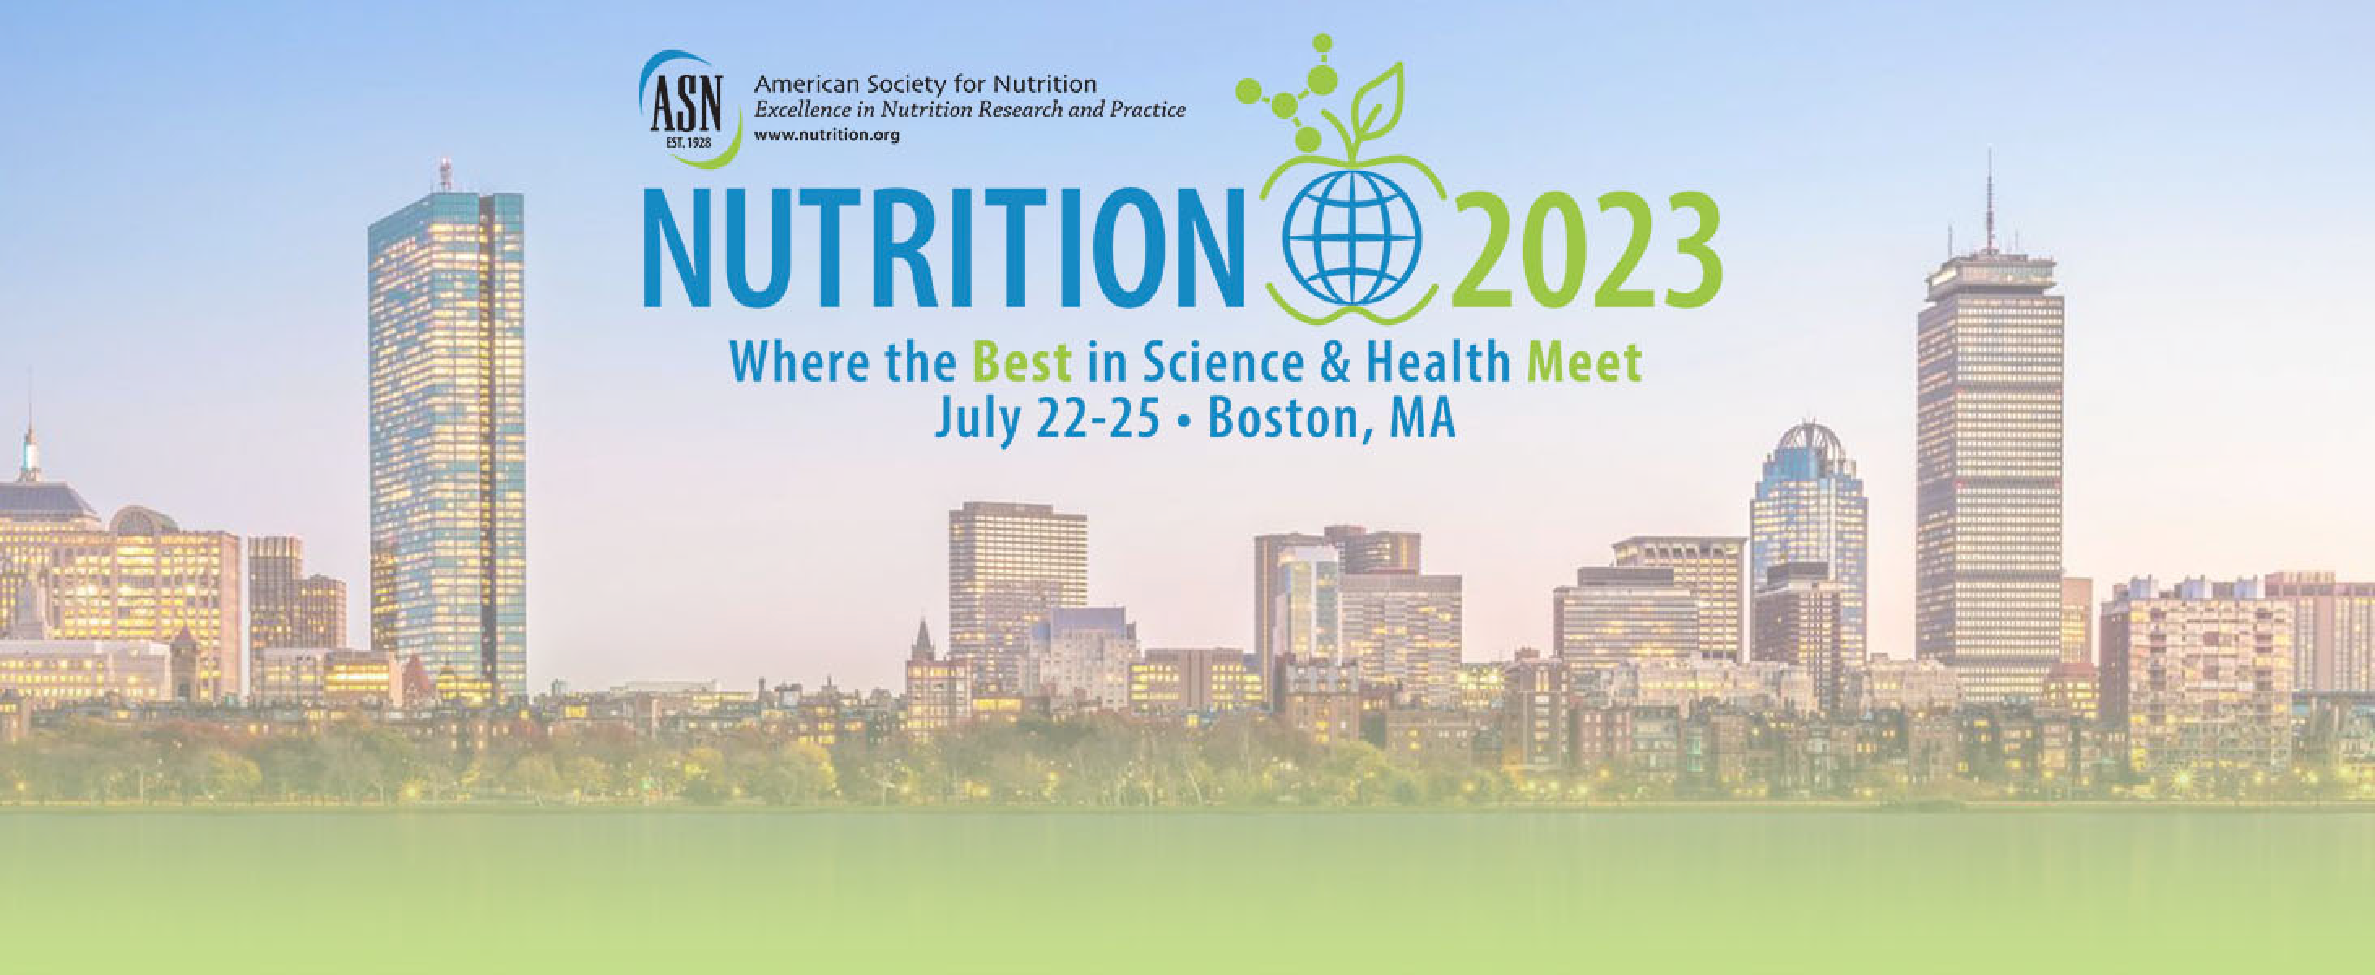 NUTRITION 2023 by the American Society for Nutrition - ASN 2023